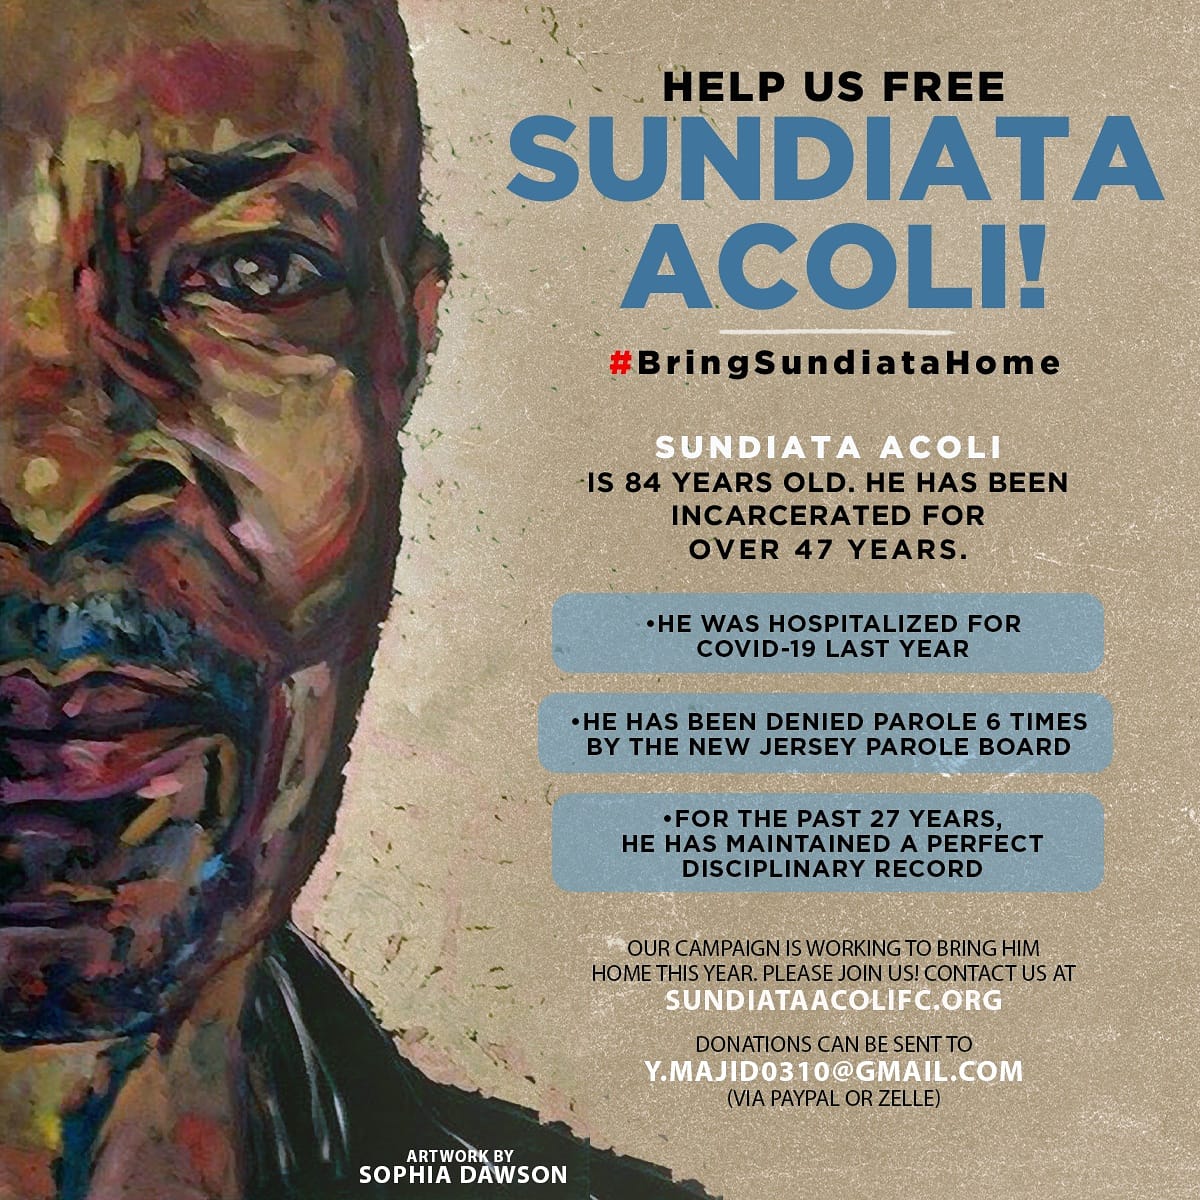 🚨 ACTION ALERT!!! 🚨
Please sign and share this petition demanding NJ Governor Phil Murphy commute the sentence of 84 year old Sundiata Acoli. This coming May will mark 48 years of Sundiata's incarceration. its past time to #BringSundiataHome!!!